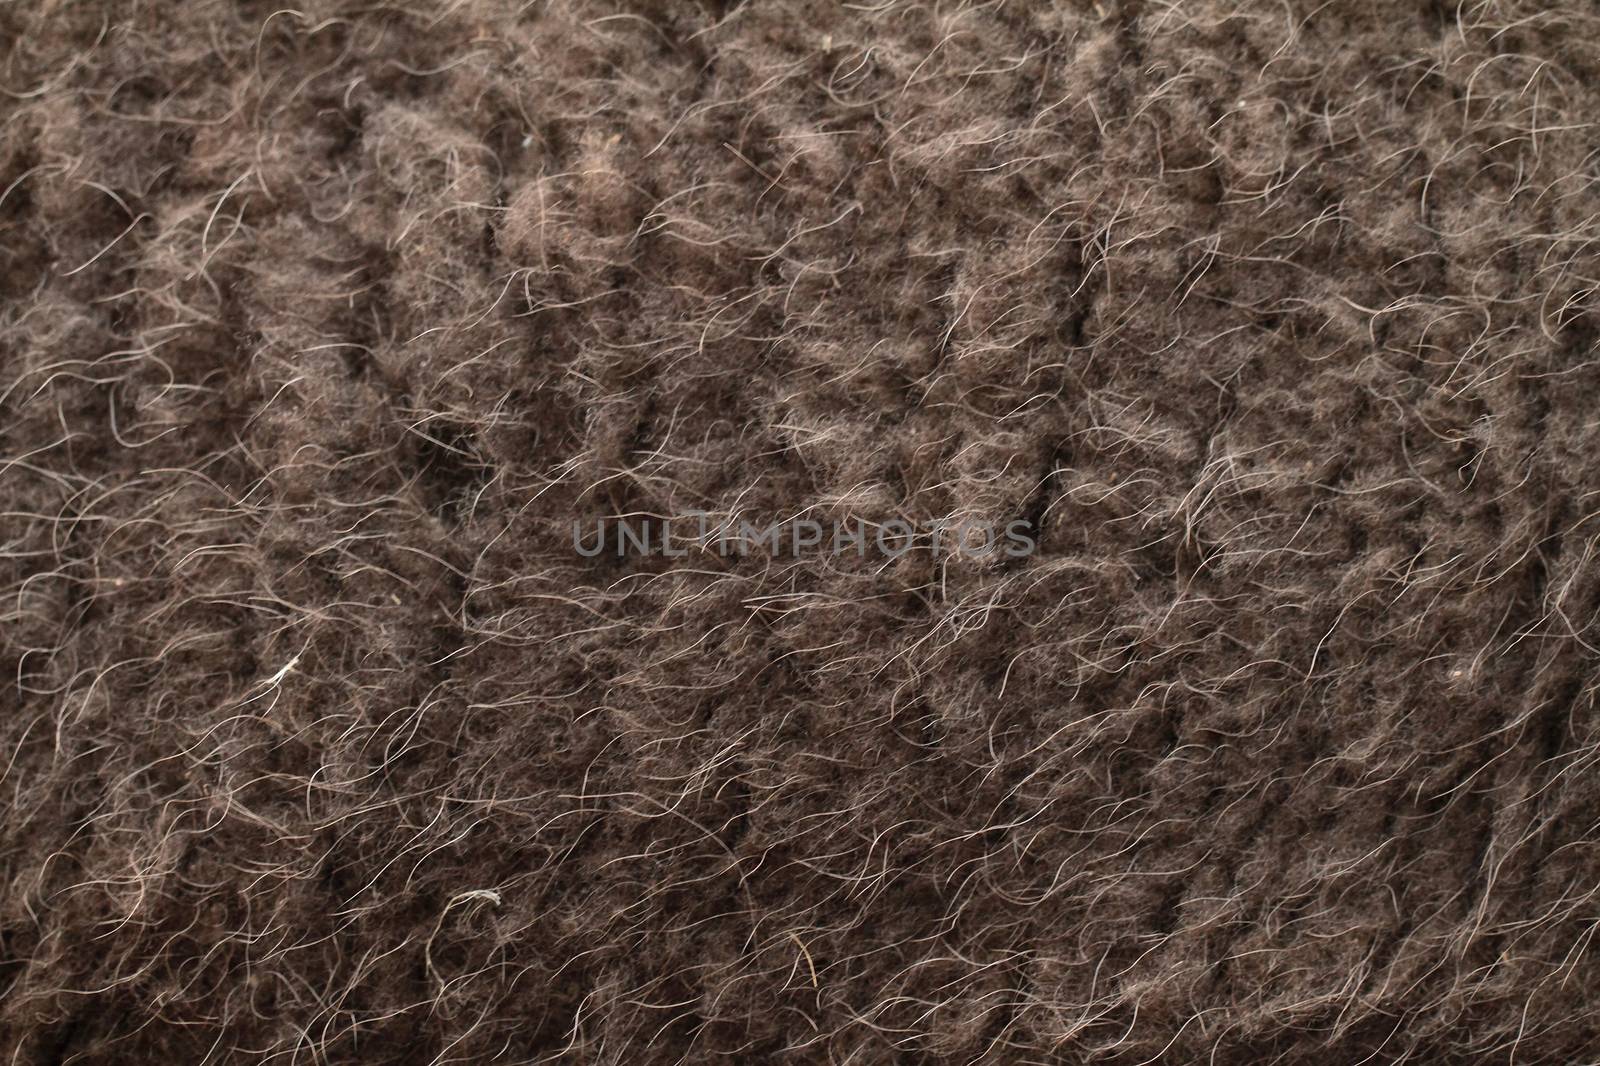 Close up photo of brown boar hairs